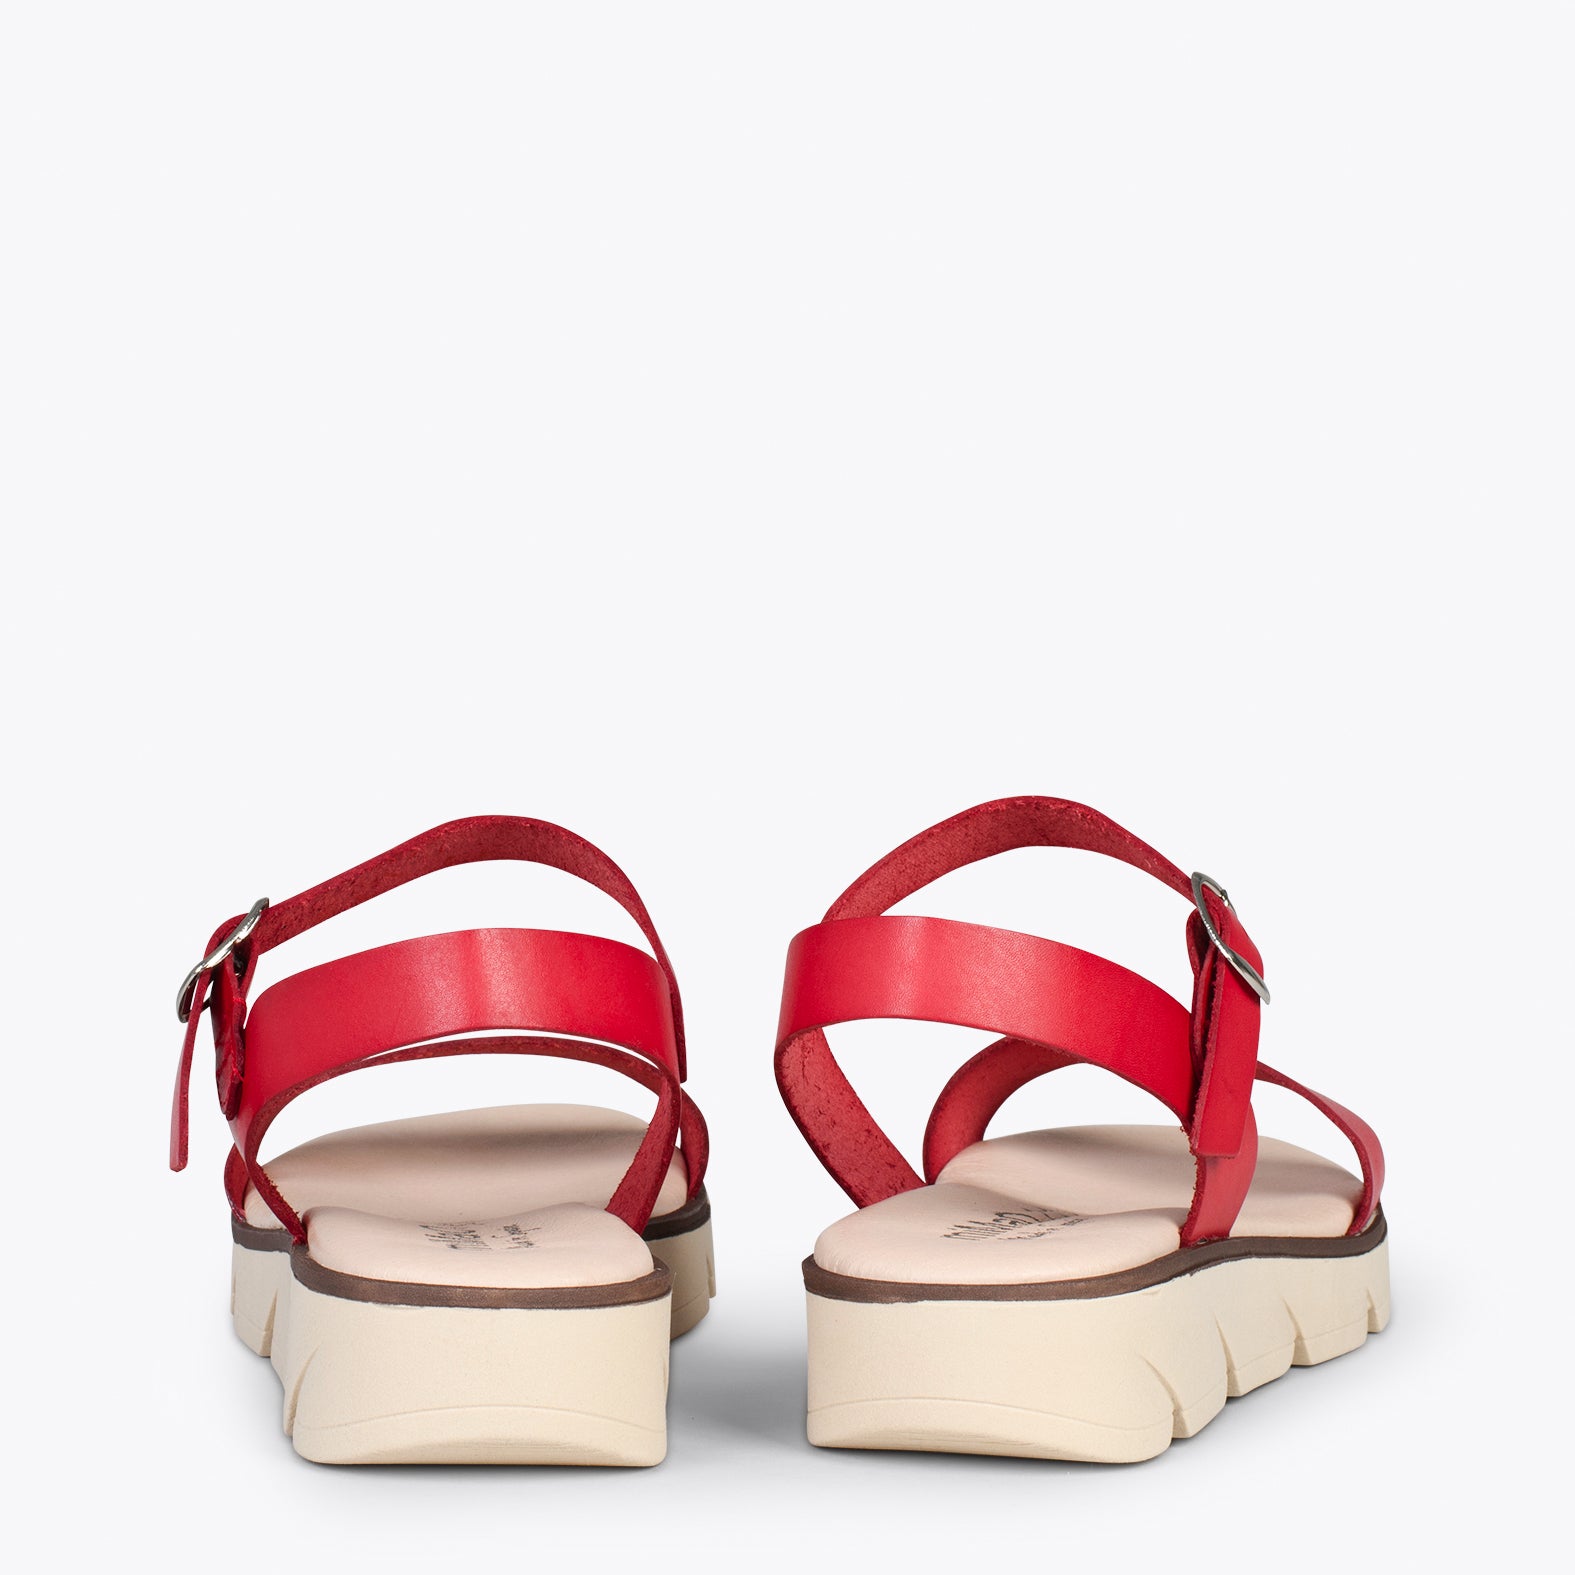 RIVER – RED leather flat sandals with wedge